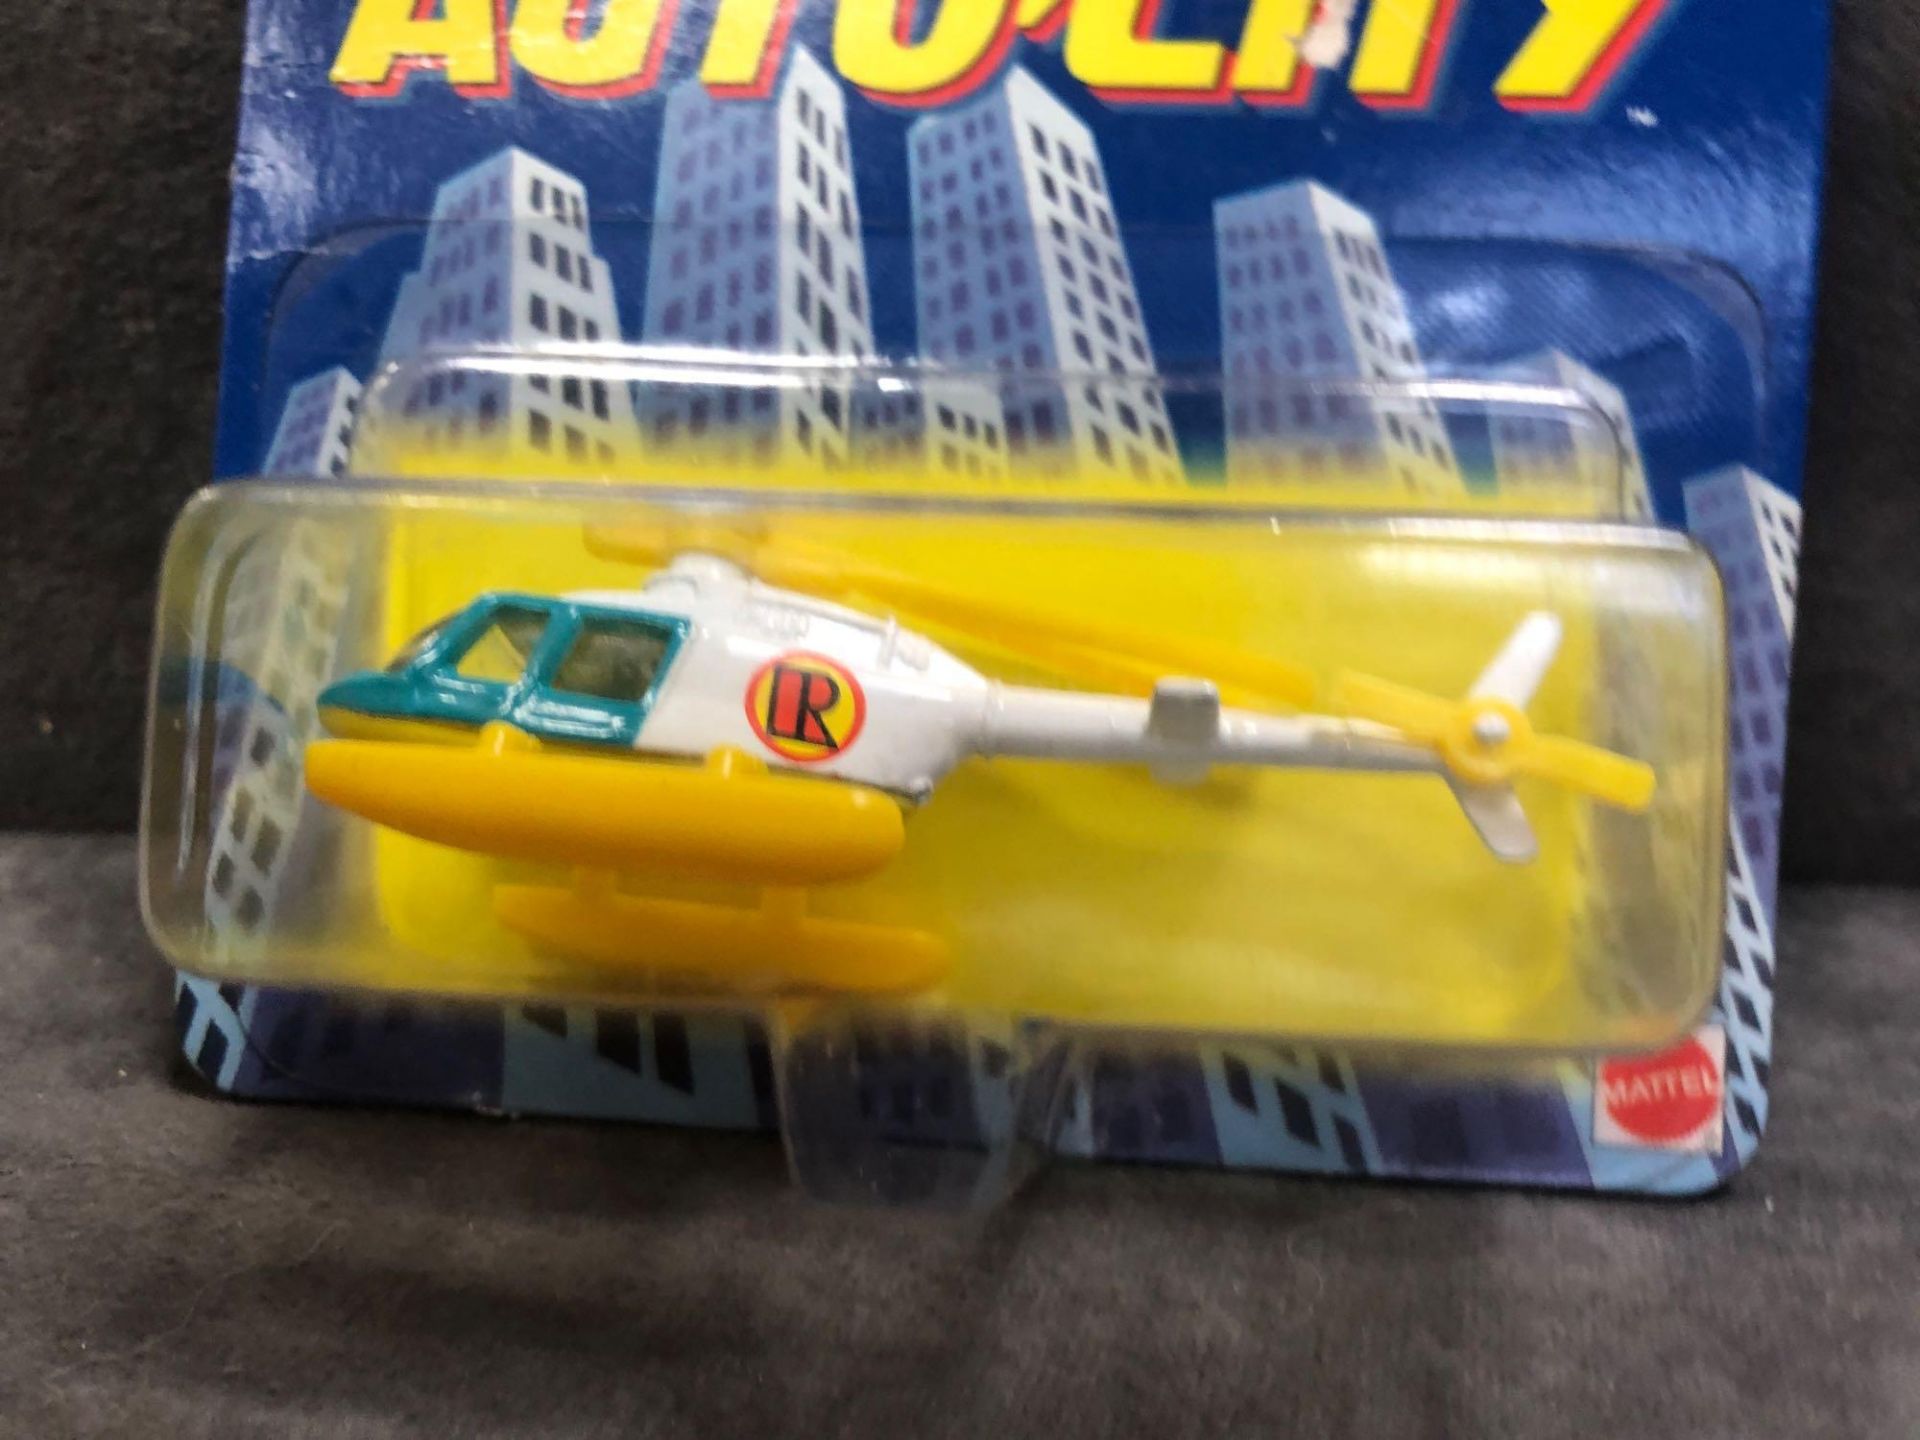 Corgi Junior Auto City Diecast #93177 Helicopter On Bubble Card - Image 2 of 2